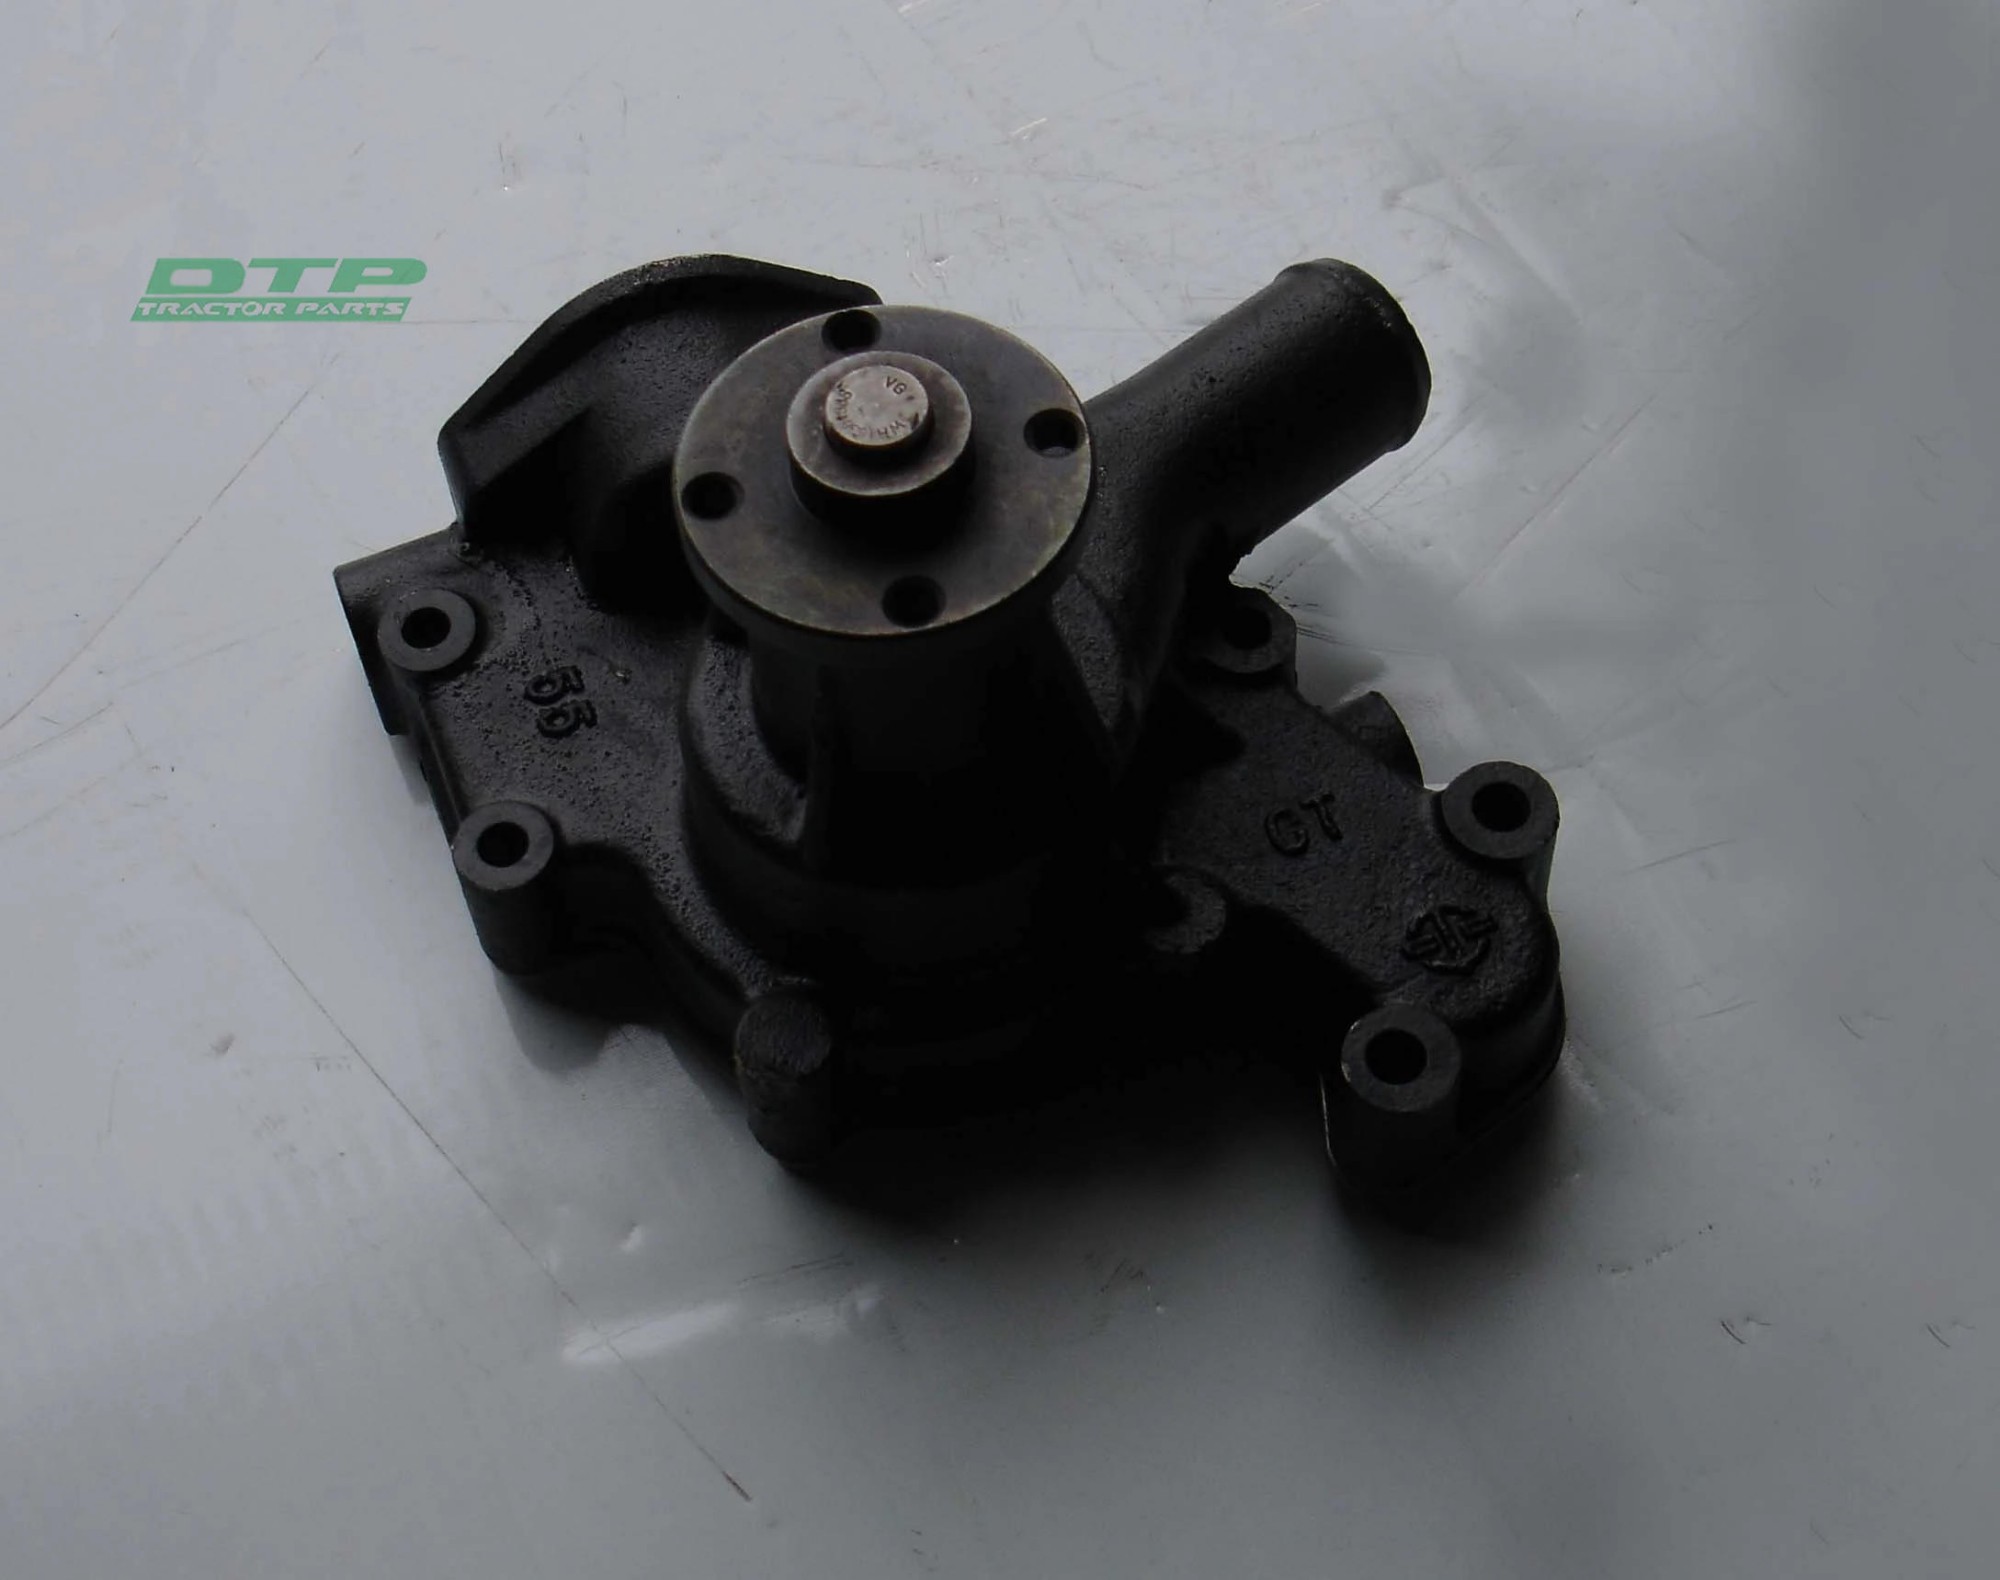 Changchai Zn390t Tractor Parts Water Pump